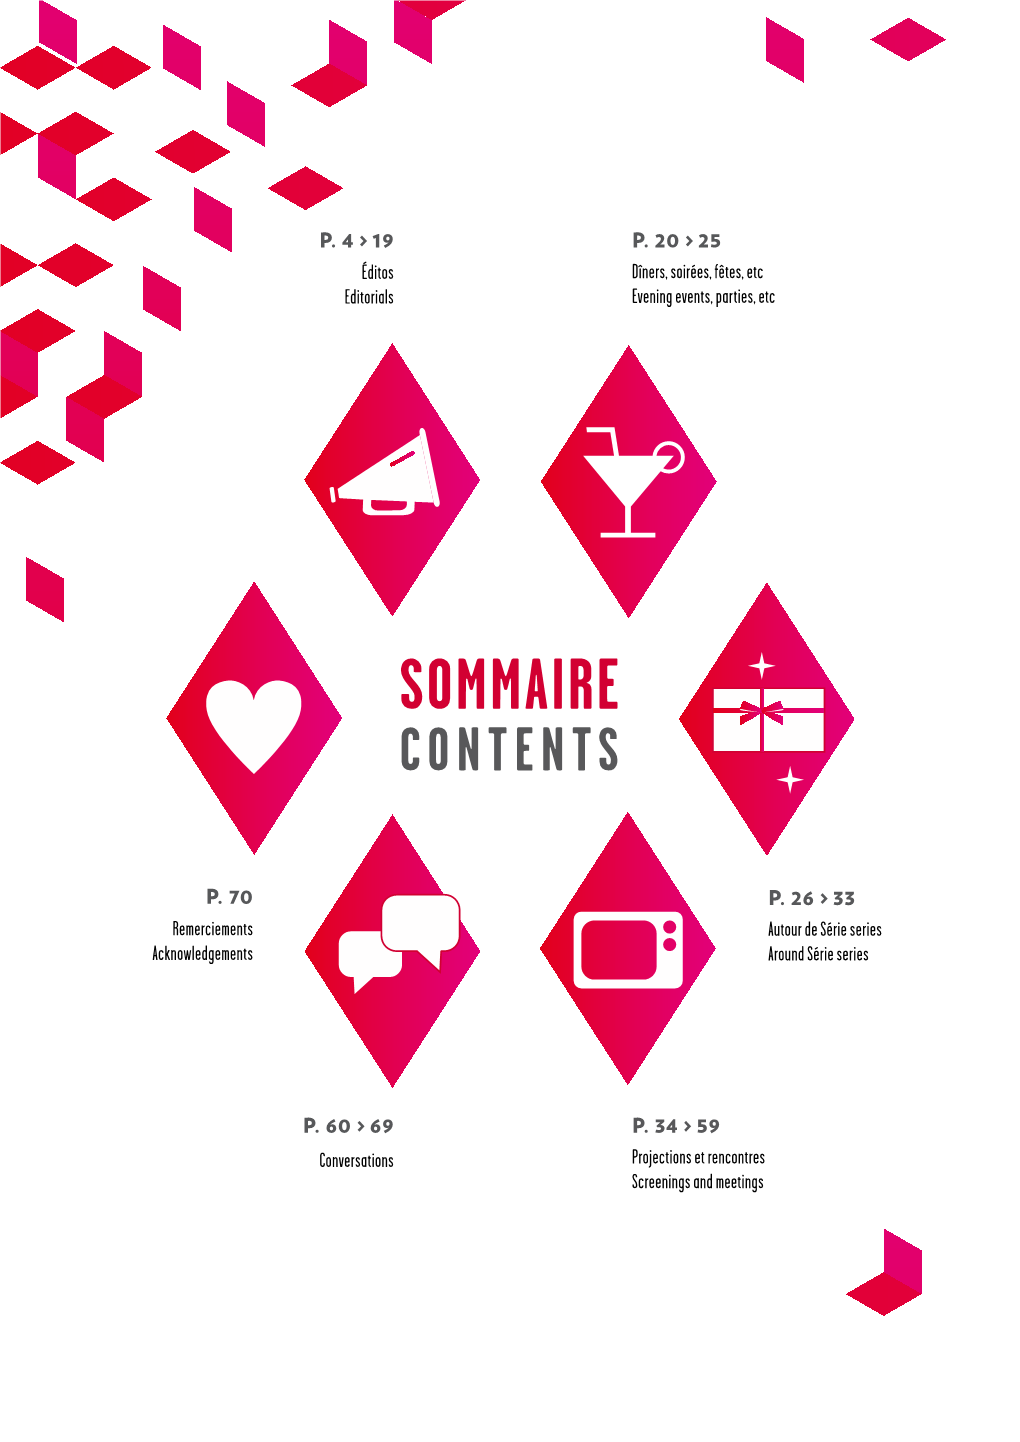 Sommaire Contents